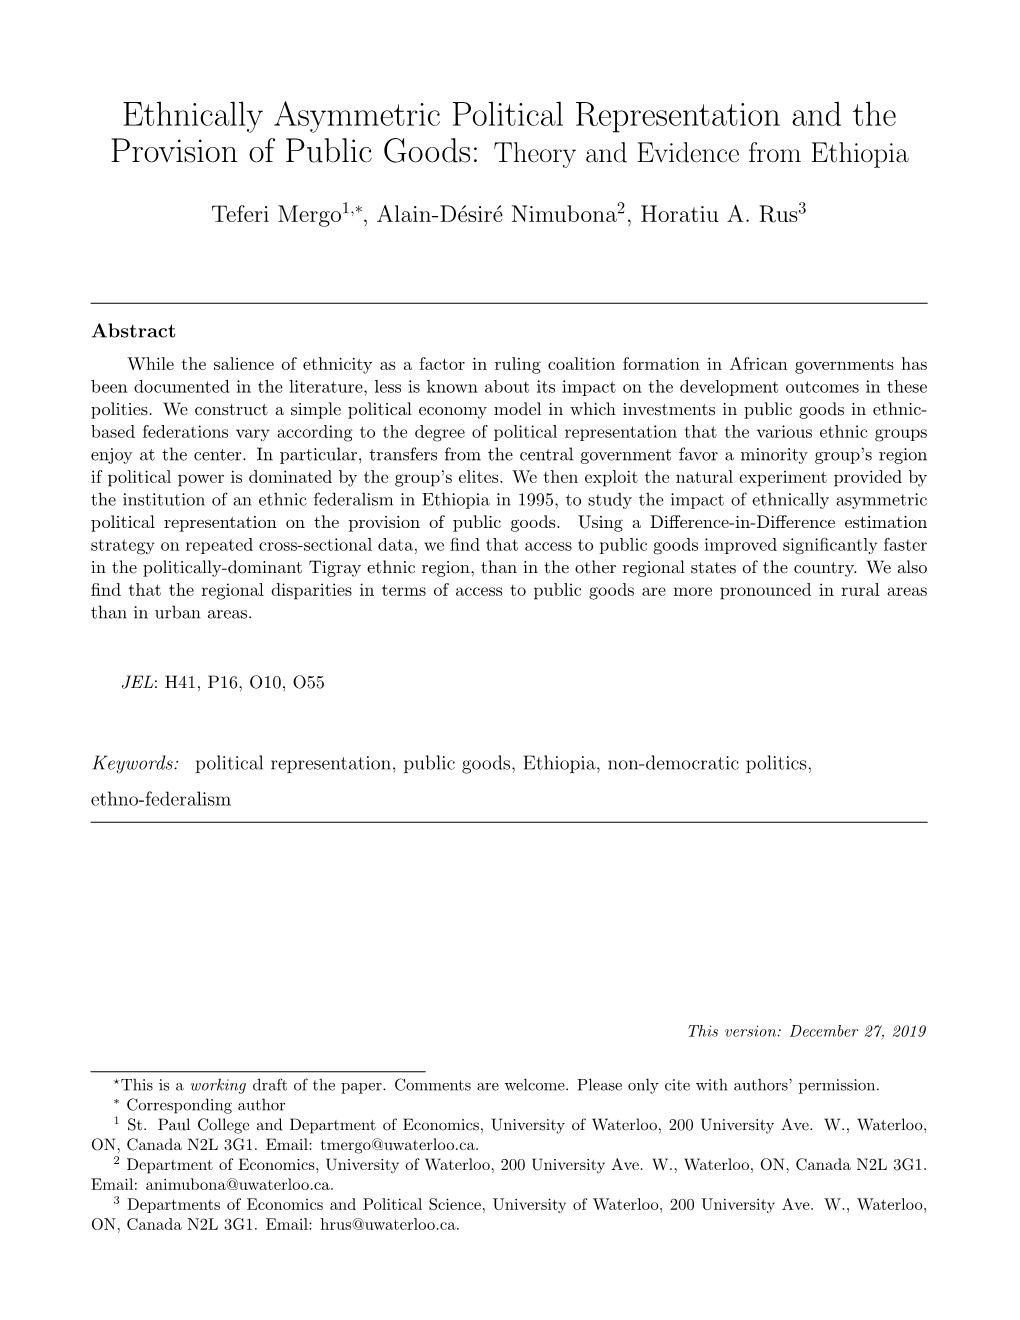 Ethnically Asymmetric Political Representation and the Provision of Public Goods: Theory and Evidence from Ethiopia